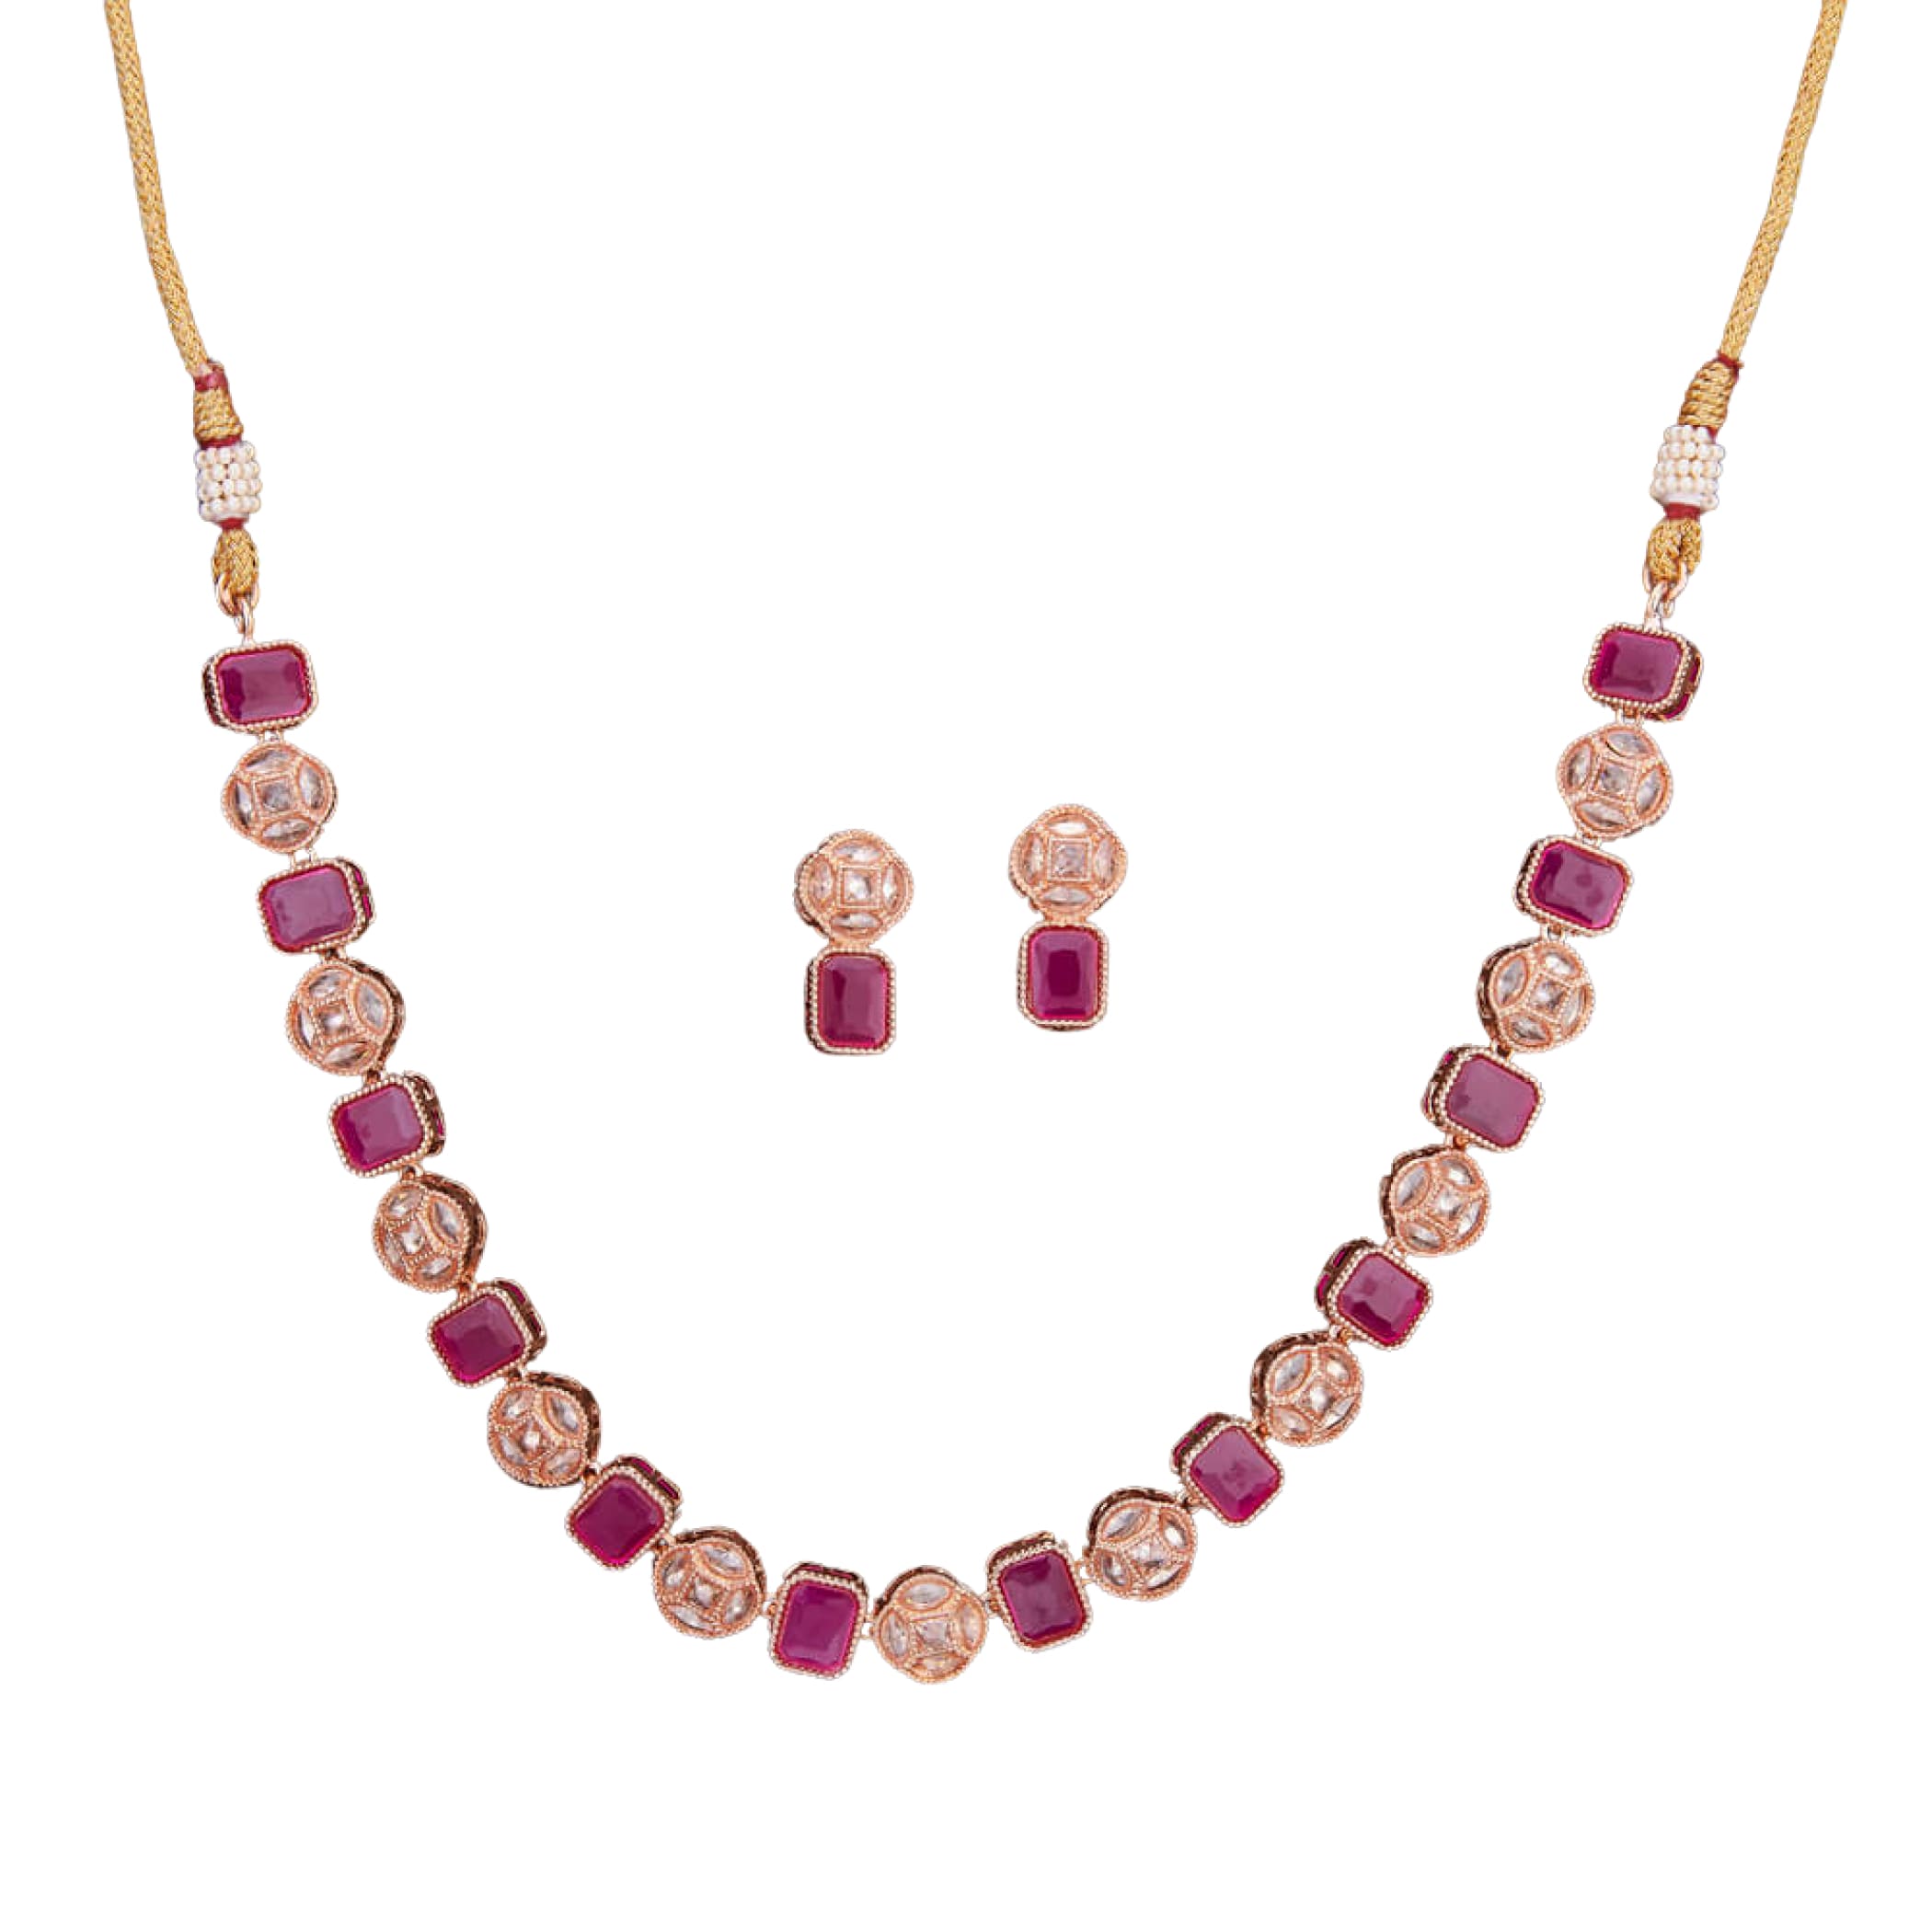 Classic necklace with rose gold plating pendant set jewelry